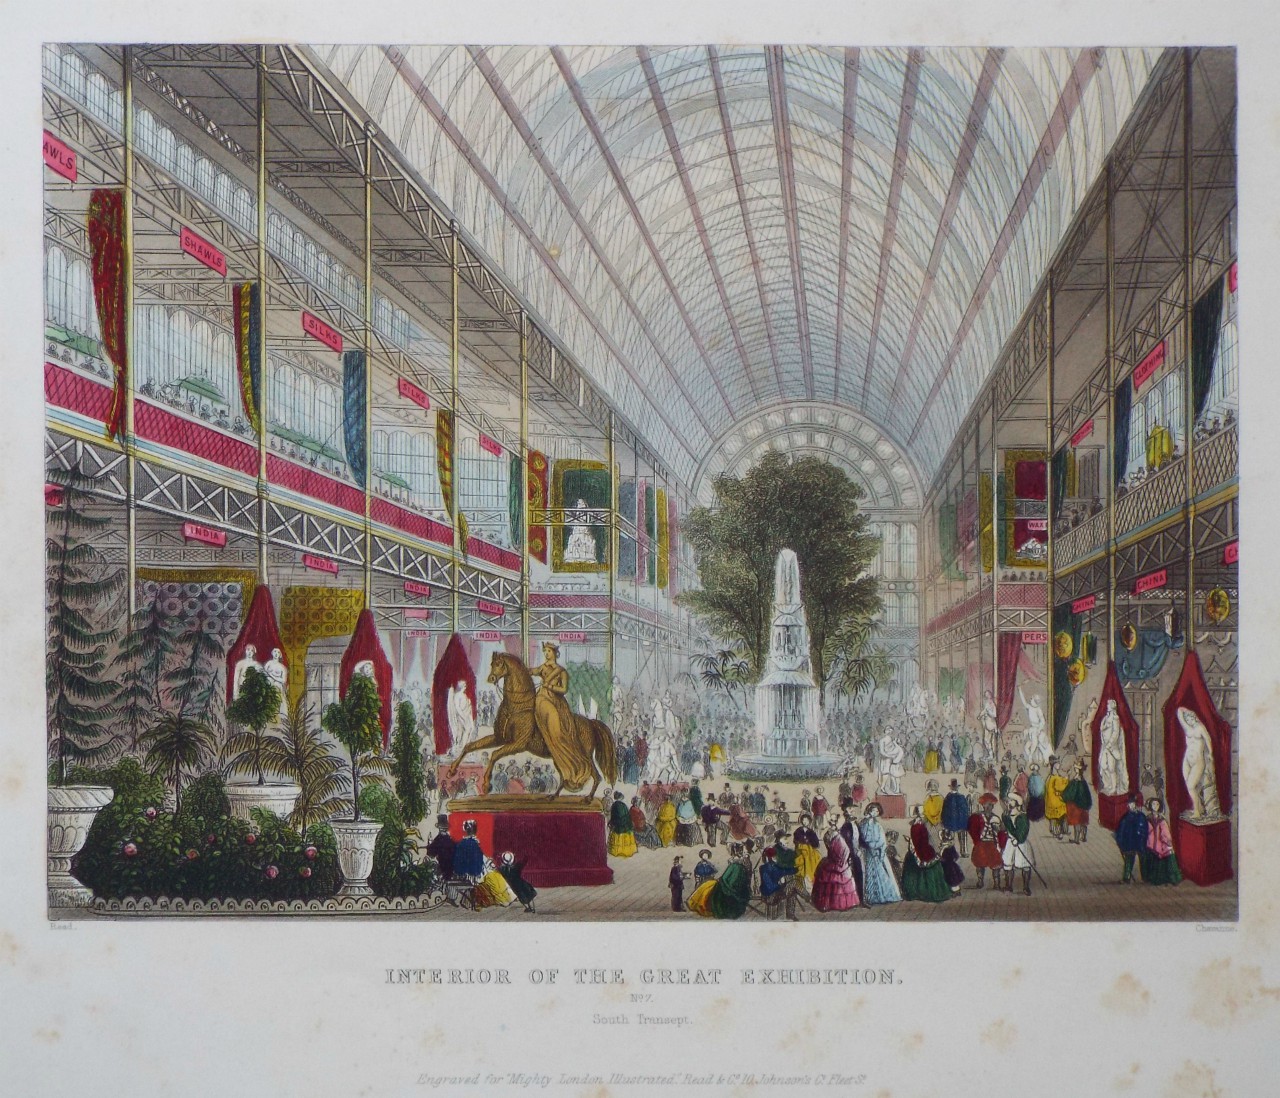 Print - Interior of the Great Exhibition. No.7. South Transept. - 